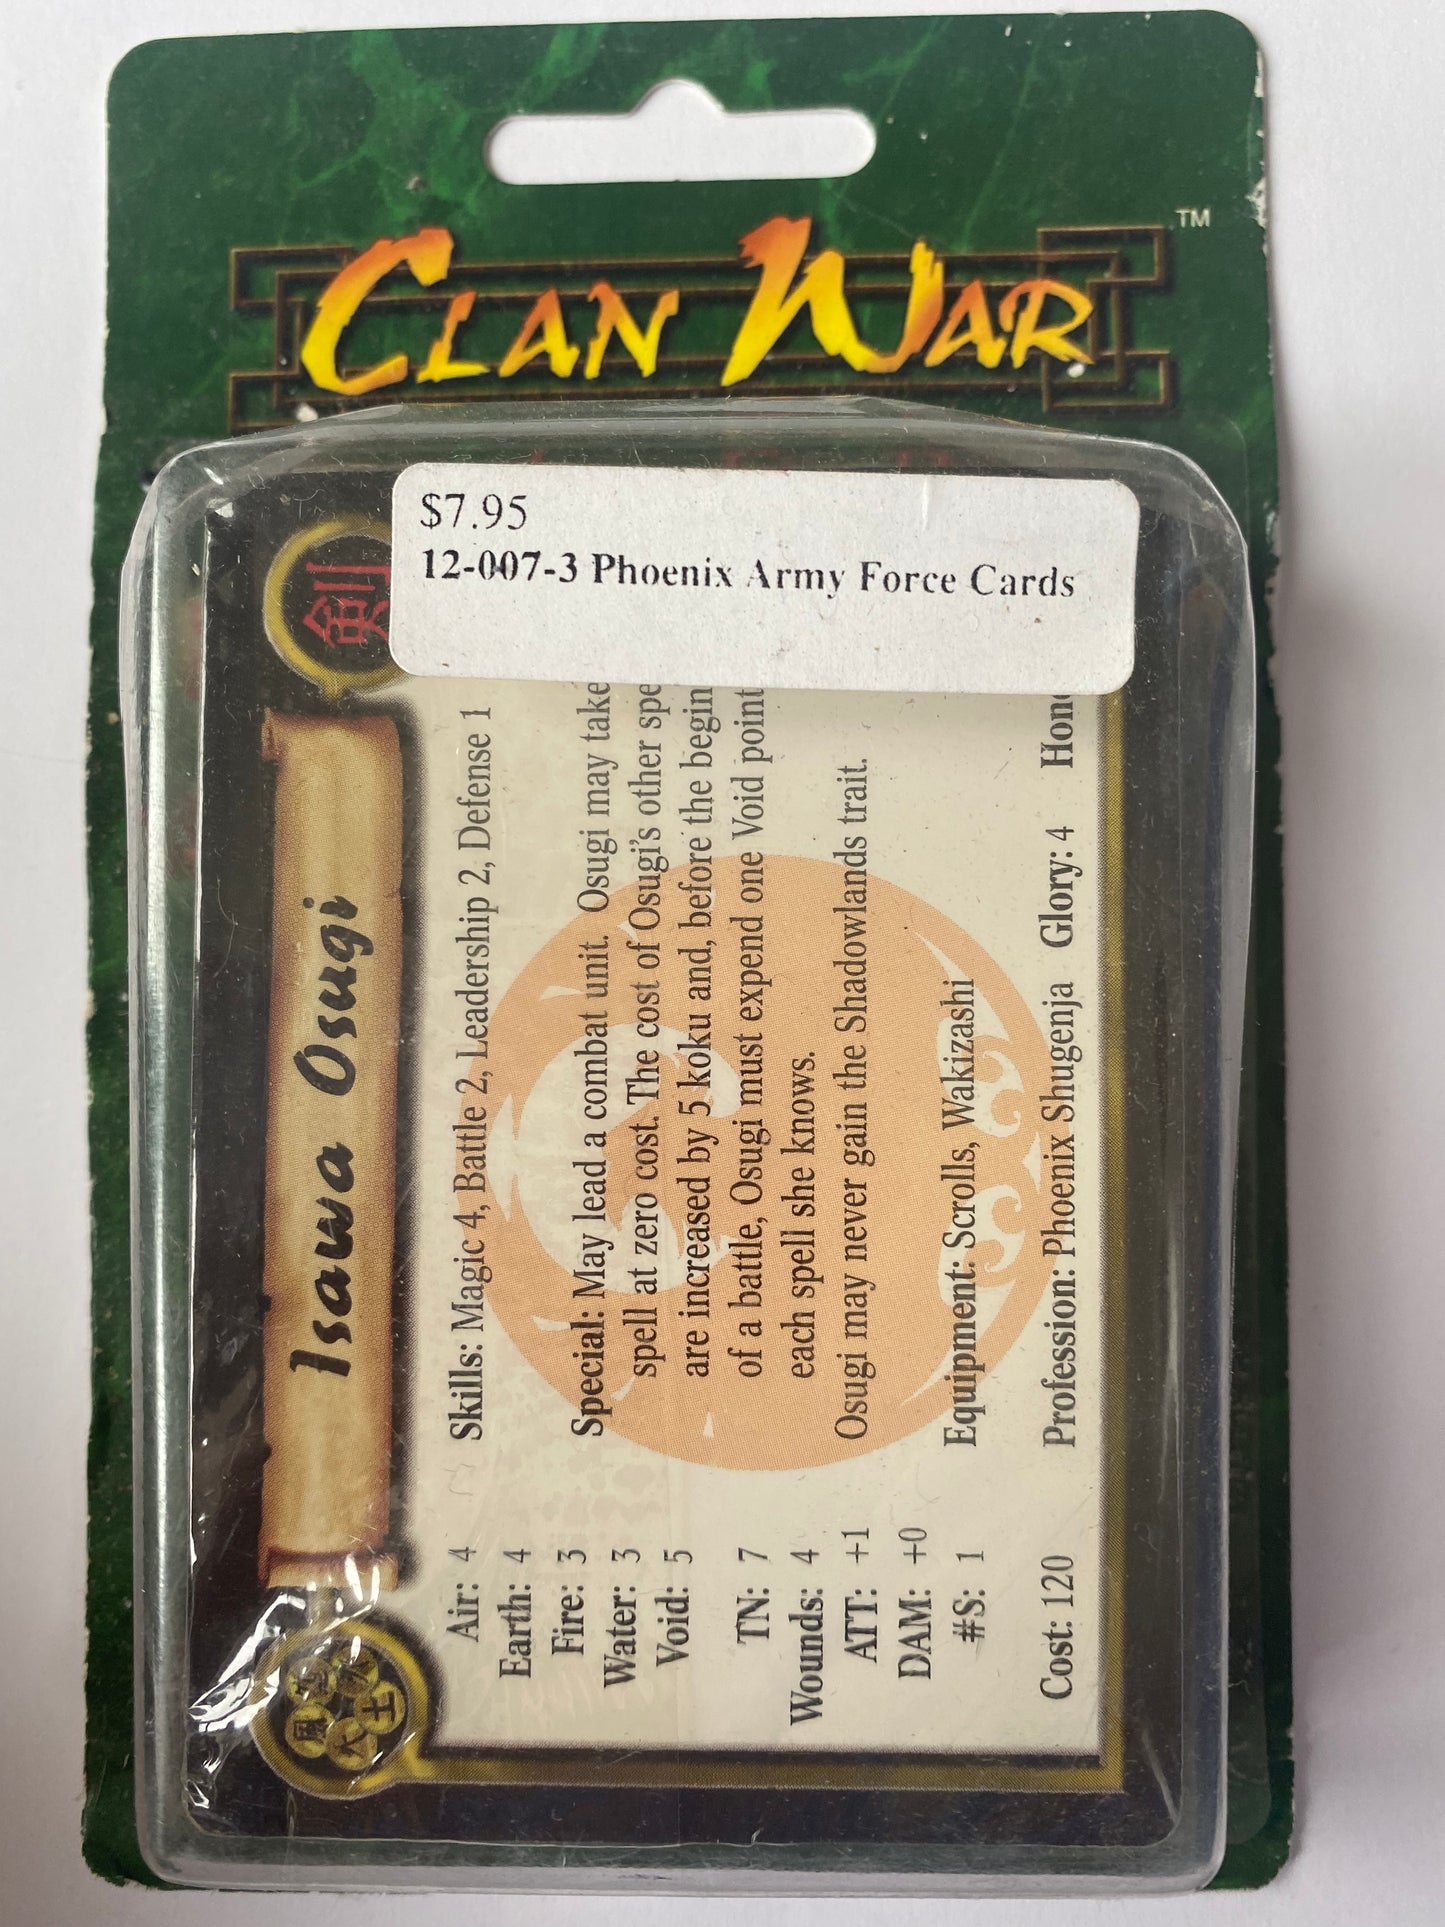 12-007-3 Phoenix Army Force Cards